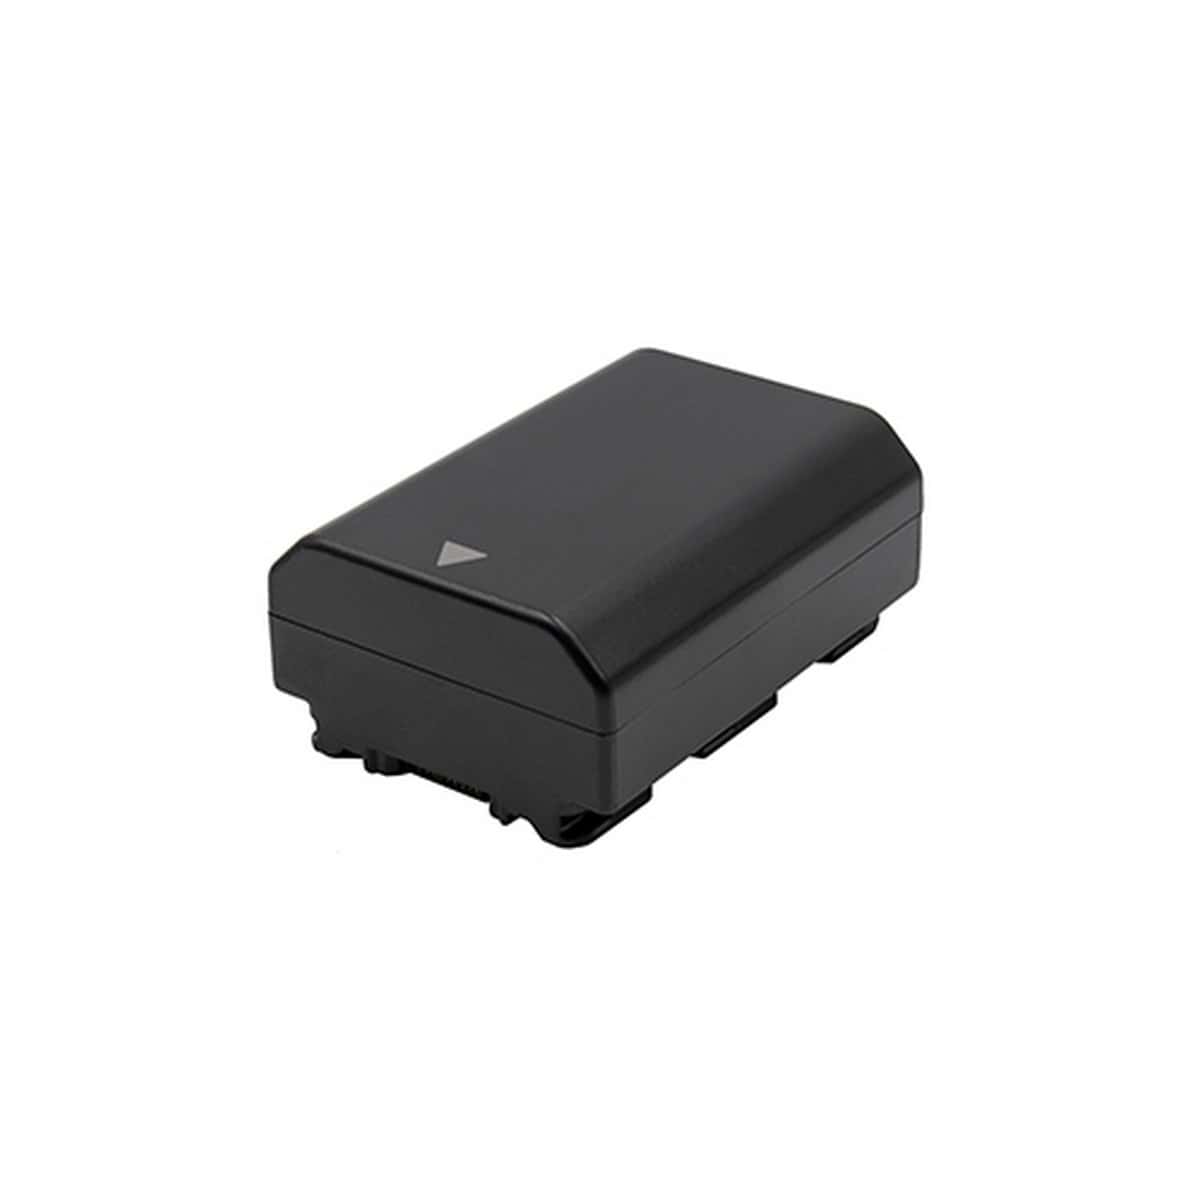 ProMaster Battery and Charger Kit for Sony NP-FZ100